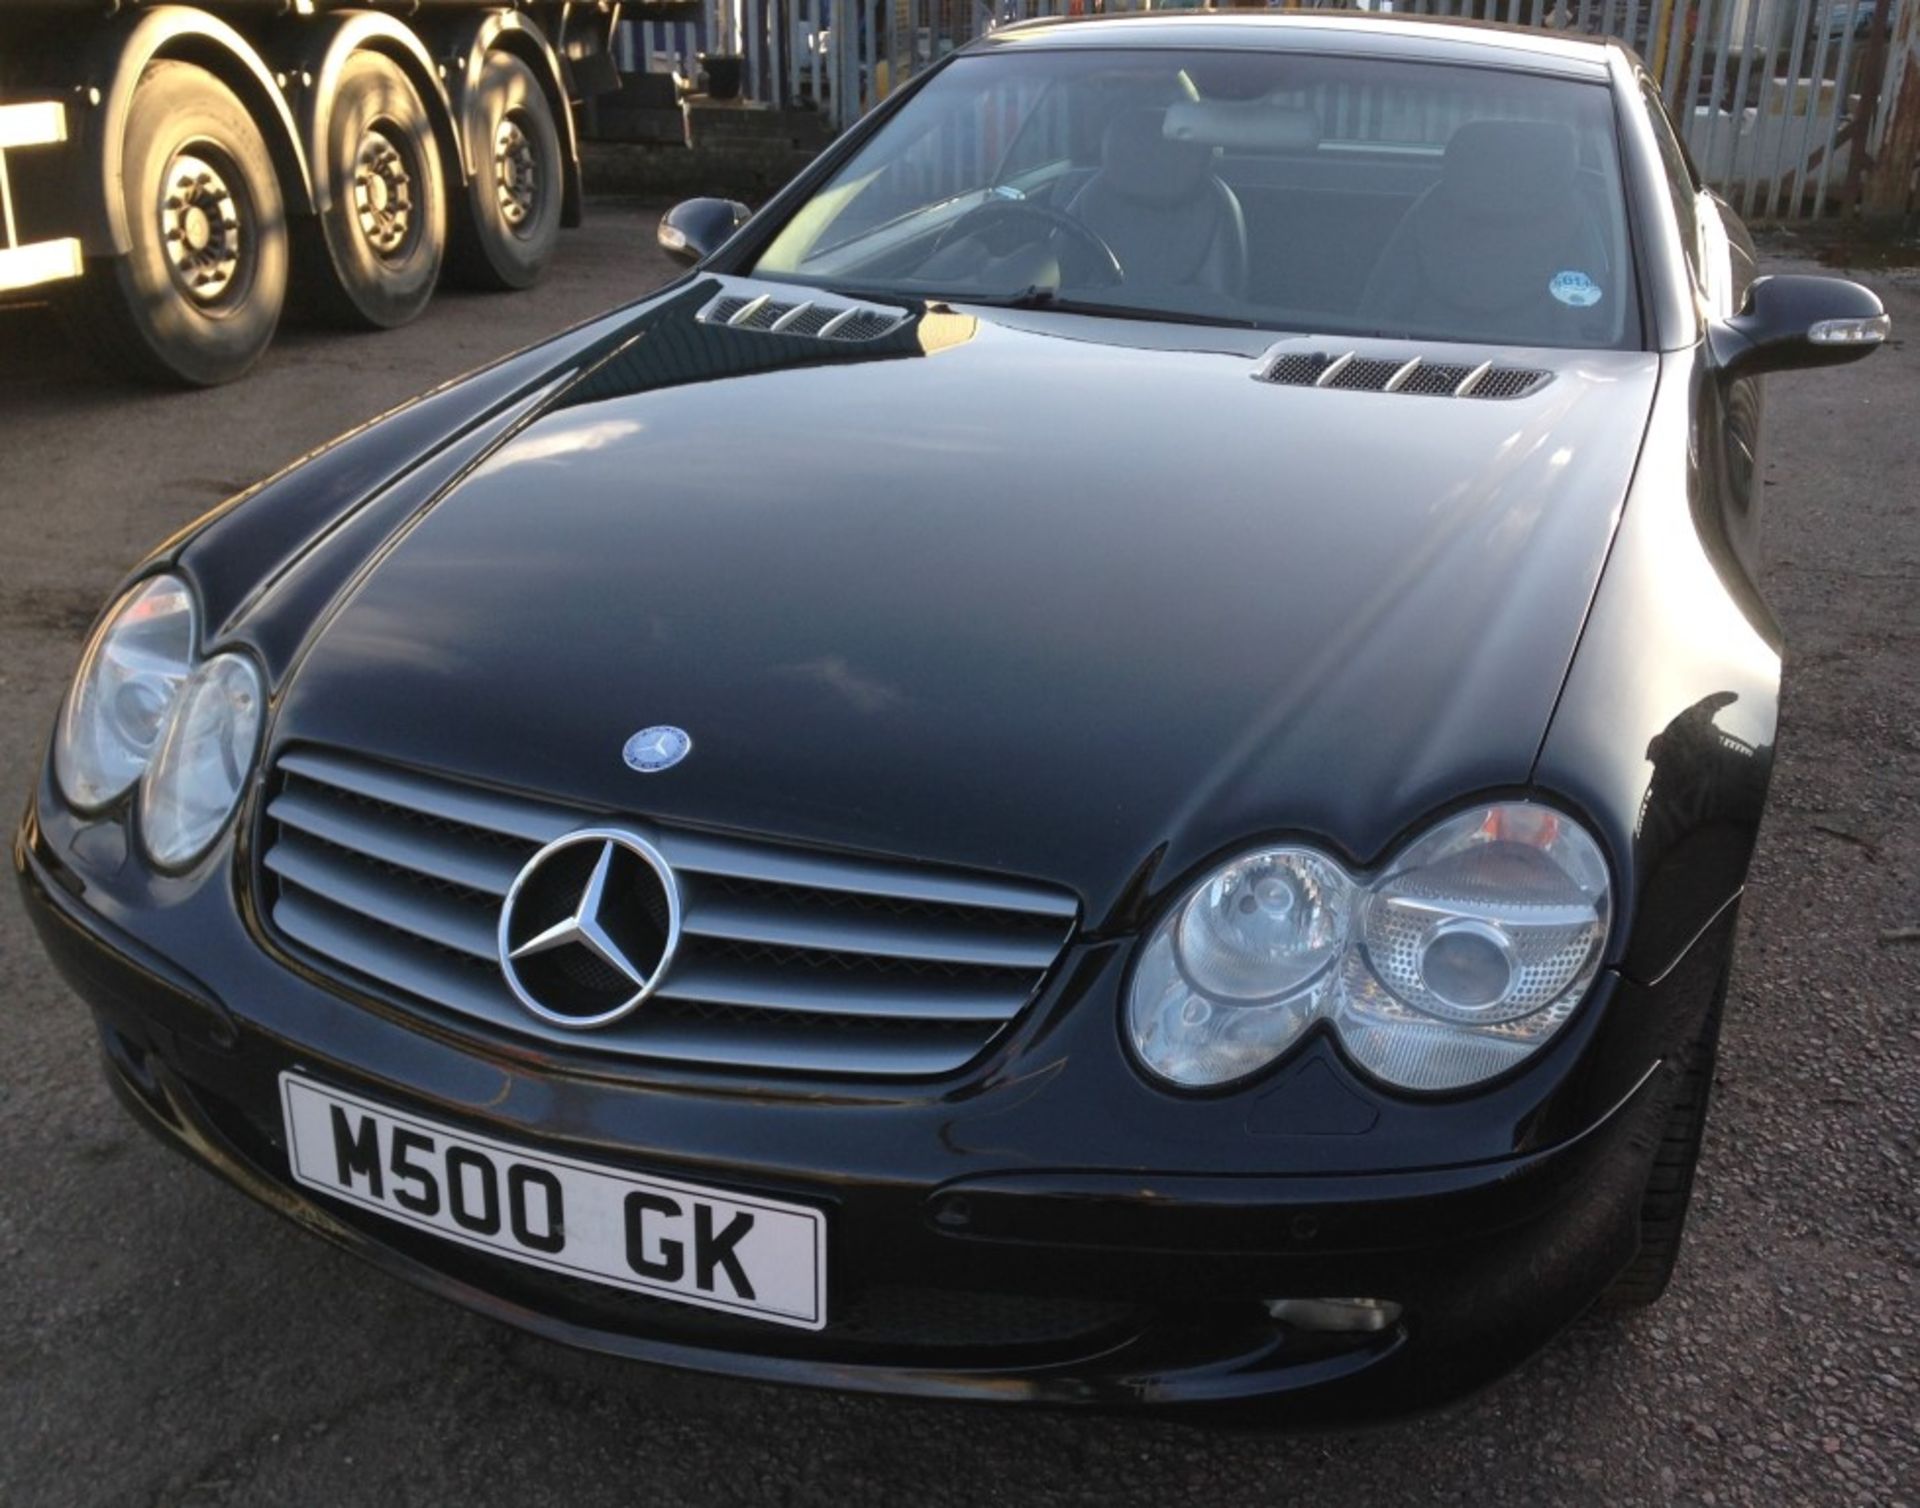 1 x Mercedes SL500 Automatic 5.0 Convertible - Petrol - Year 2002 - 94,500 Miles - Long MOT Expiry - Image 9 of 48